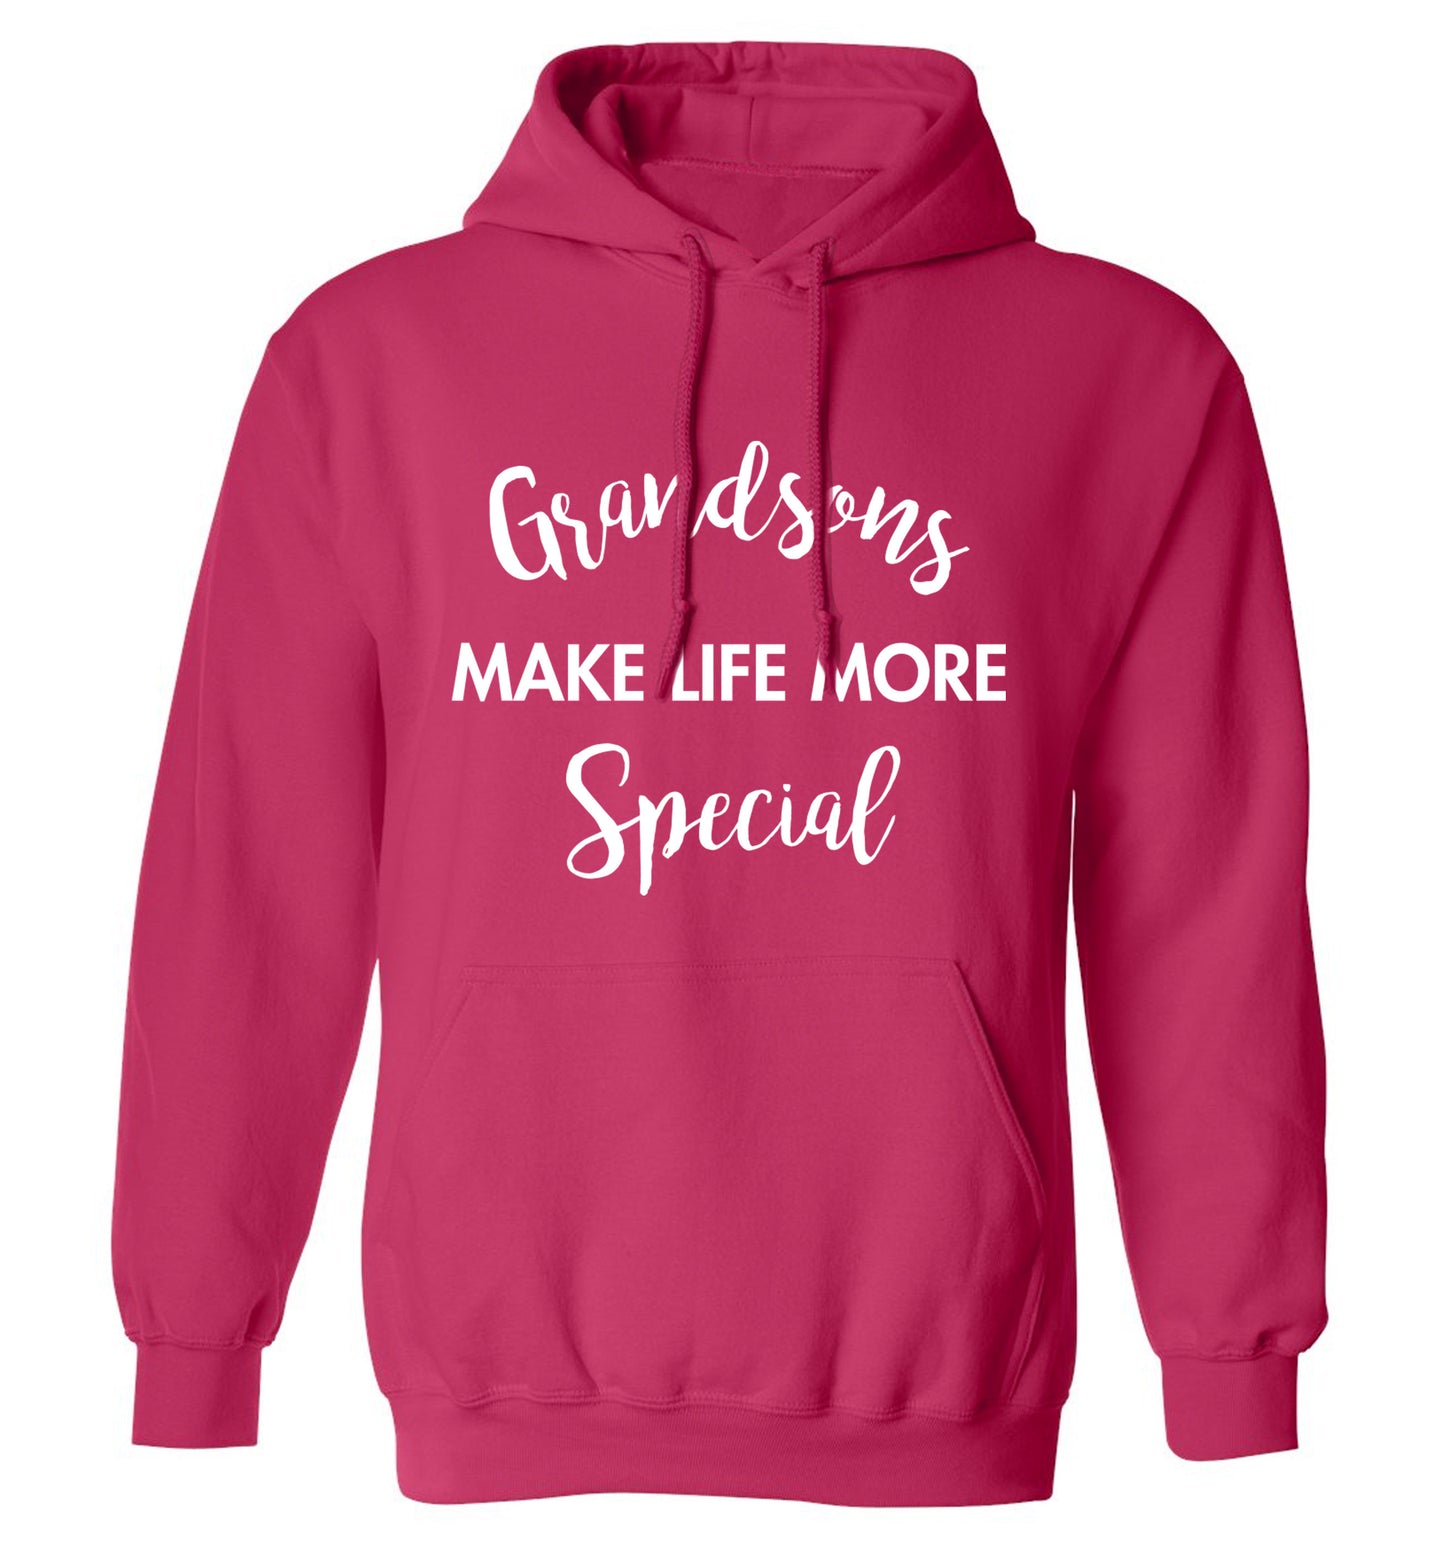 Grandsons make life more special adults unisex pink hoodie 2XL